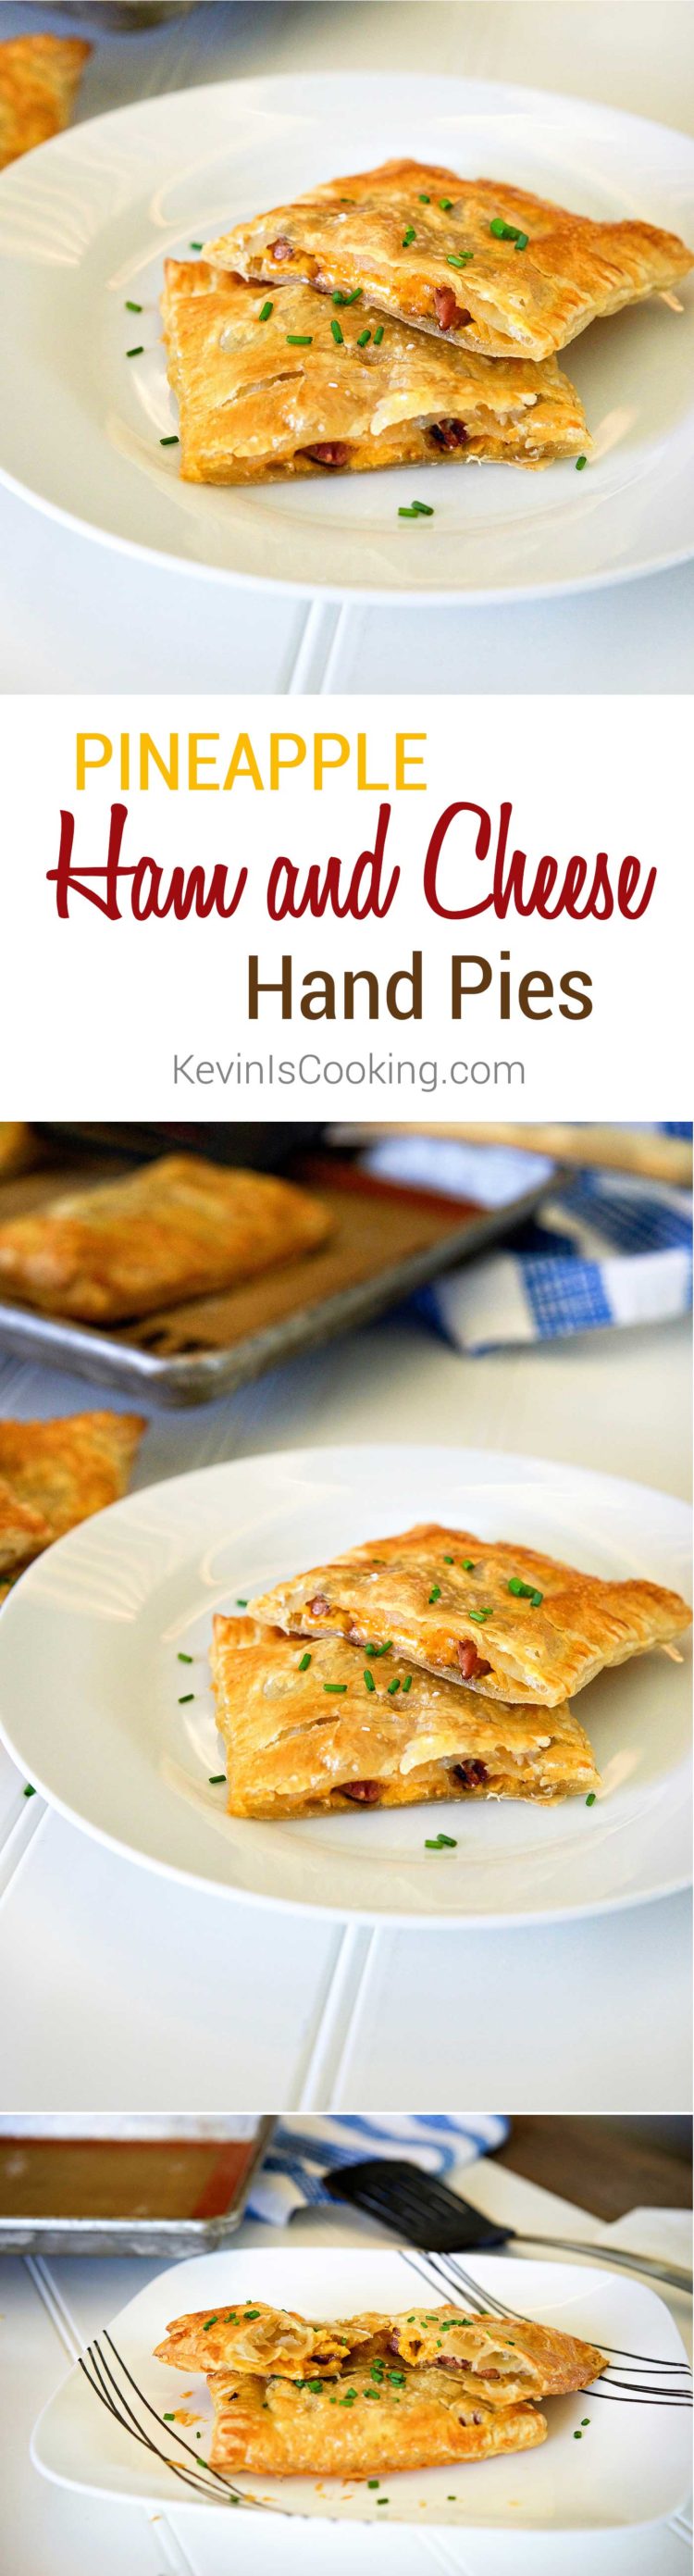 Pineapple Ham and Cheese Hand Pies. www.keviniscooking.com